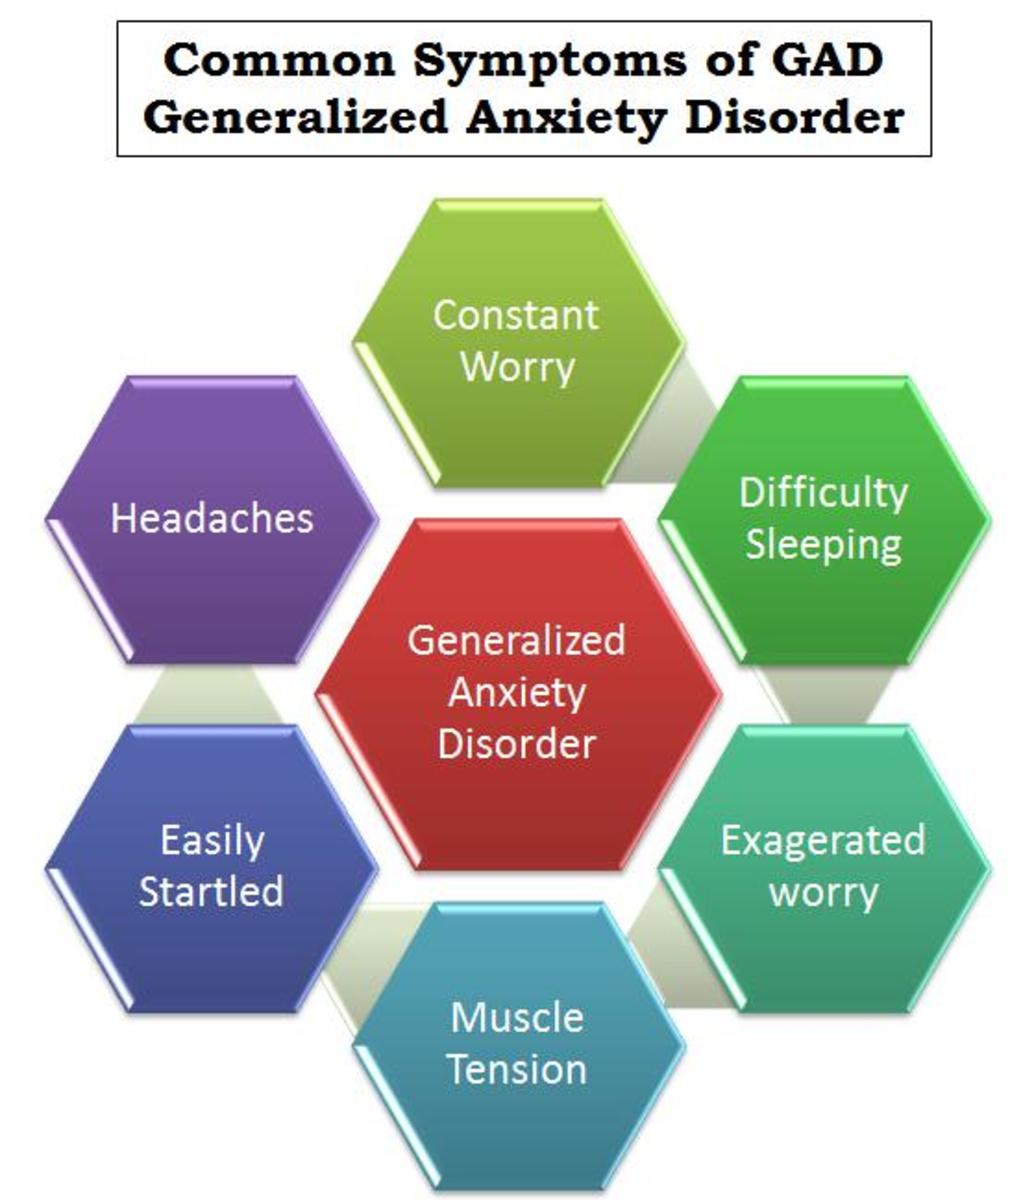 How Is an Anxiety Disorder Diagnosed?